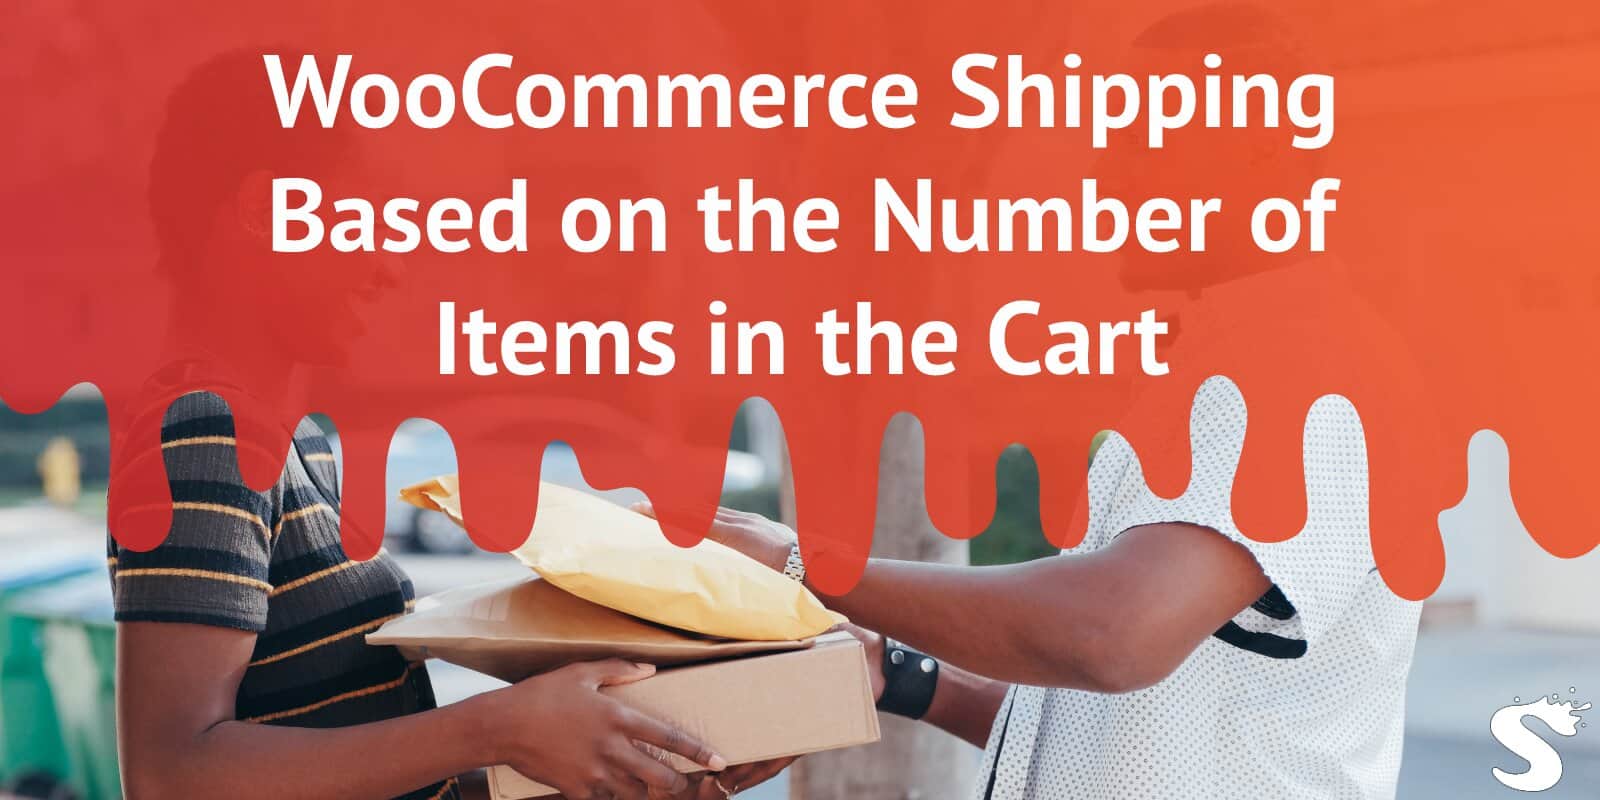 How to Set Up WooCommerce Shipping Based on the Number of Items in the Cart